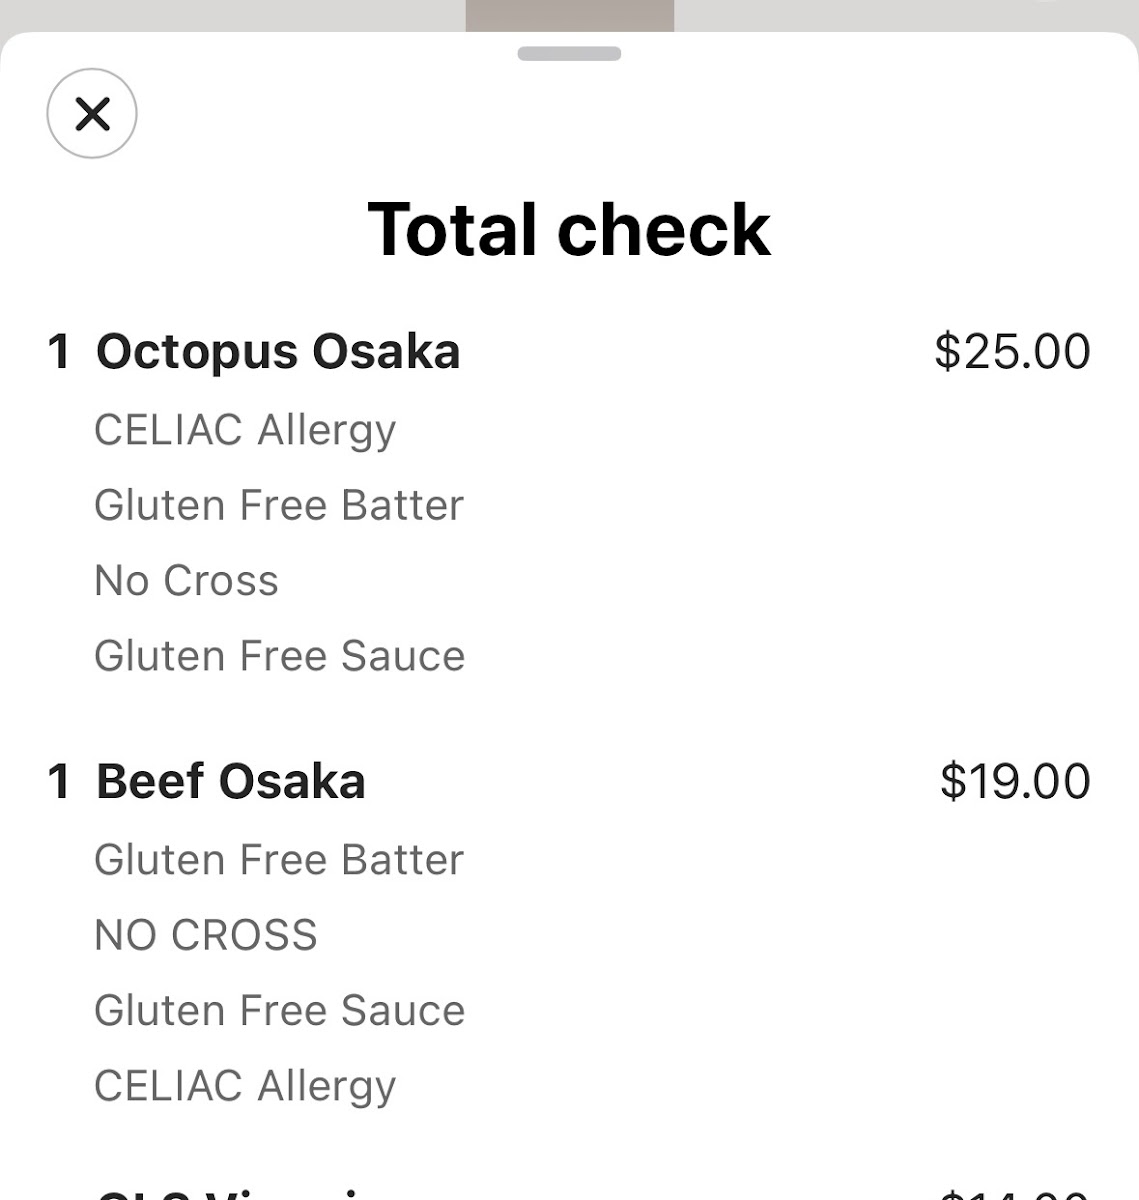 celiac and cross noted on the check